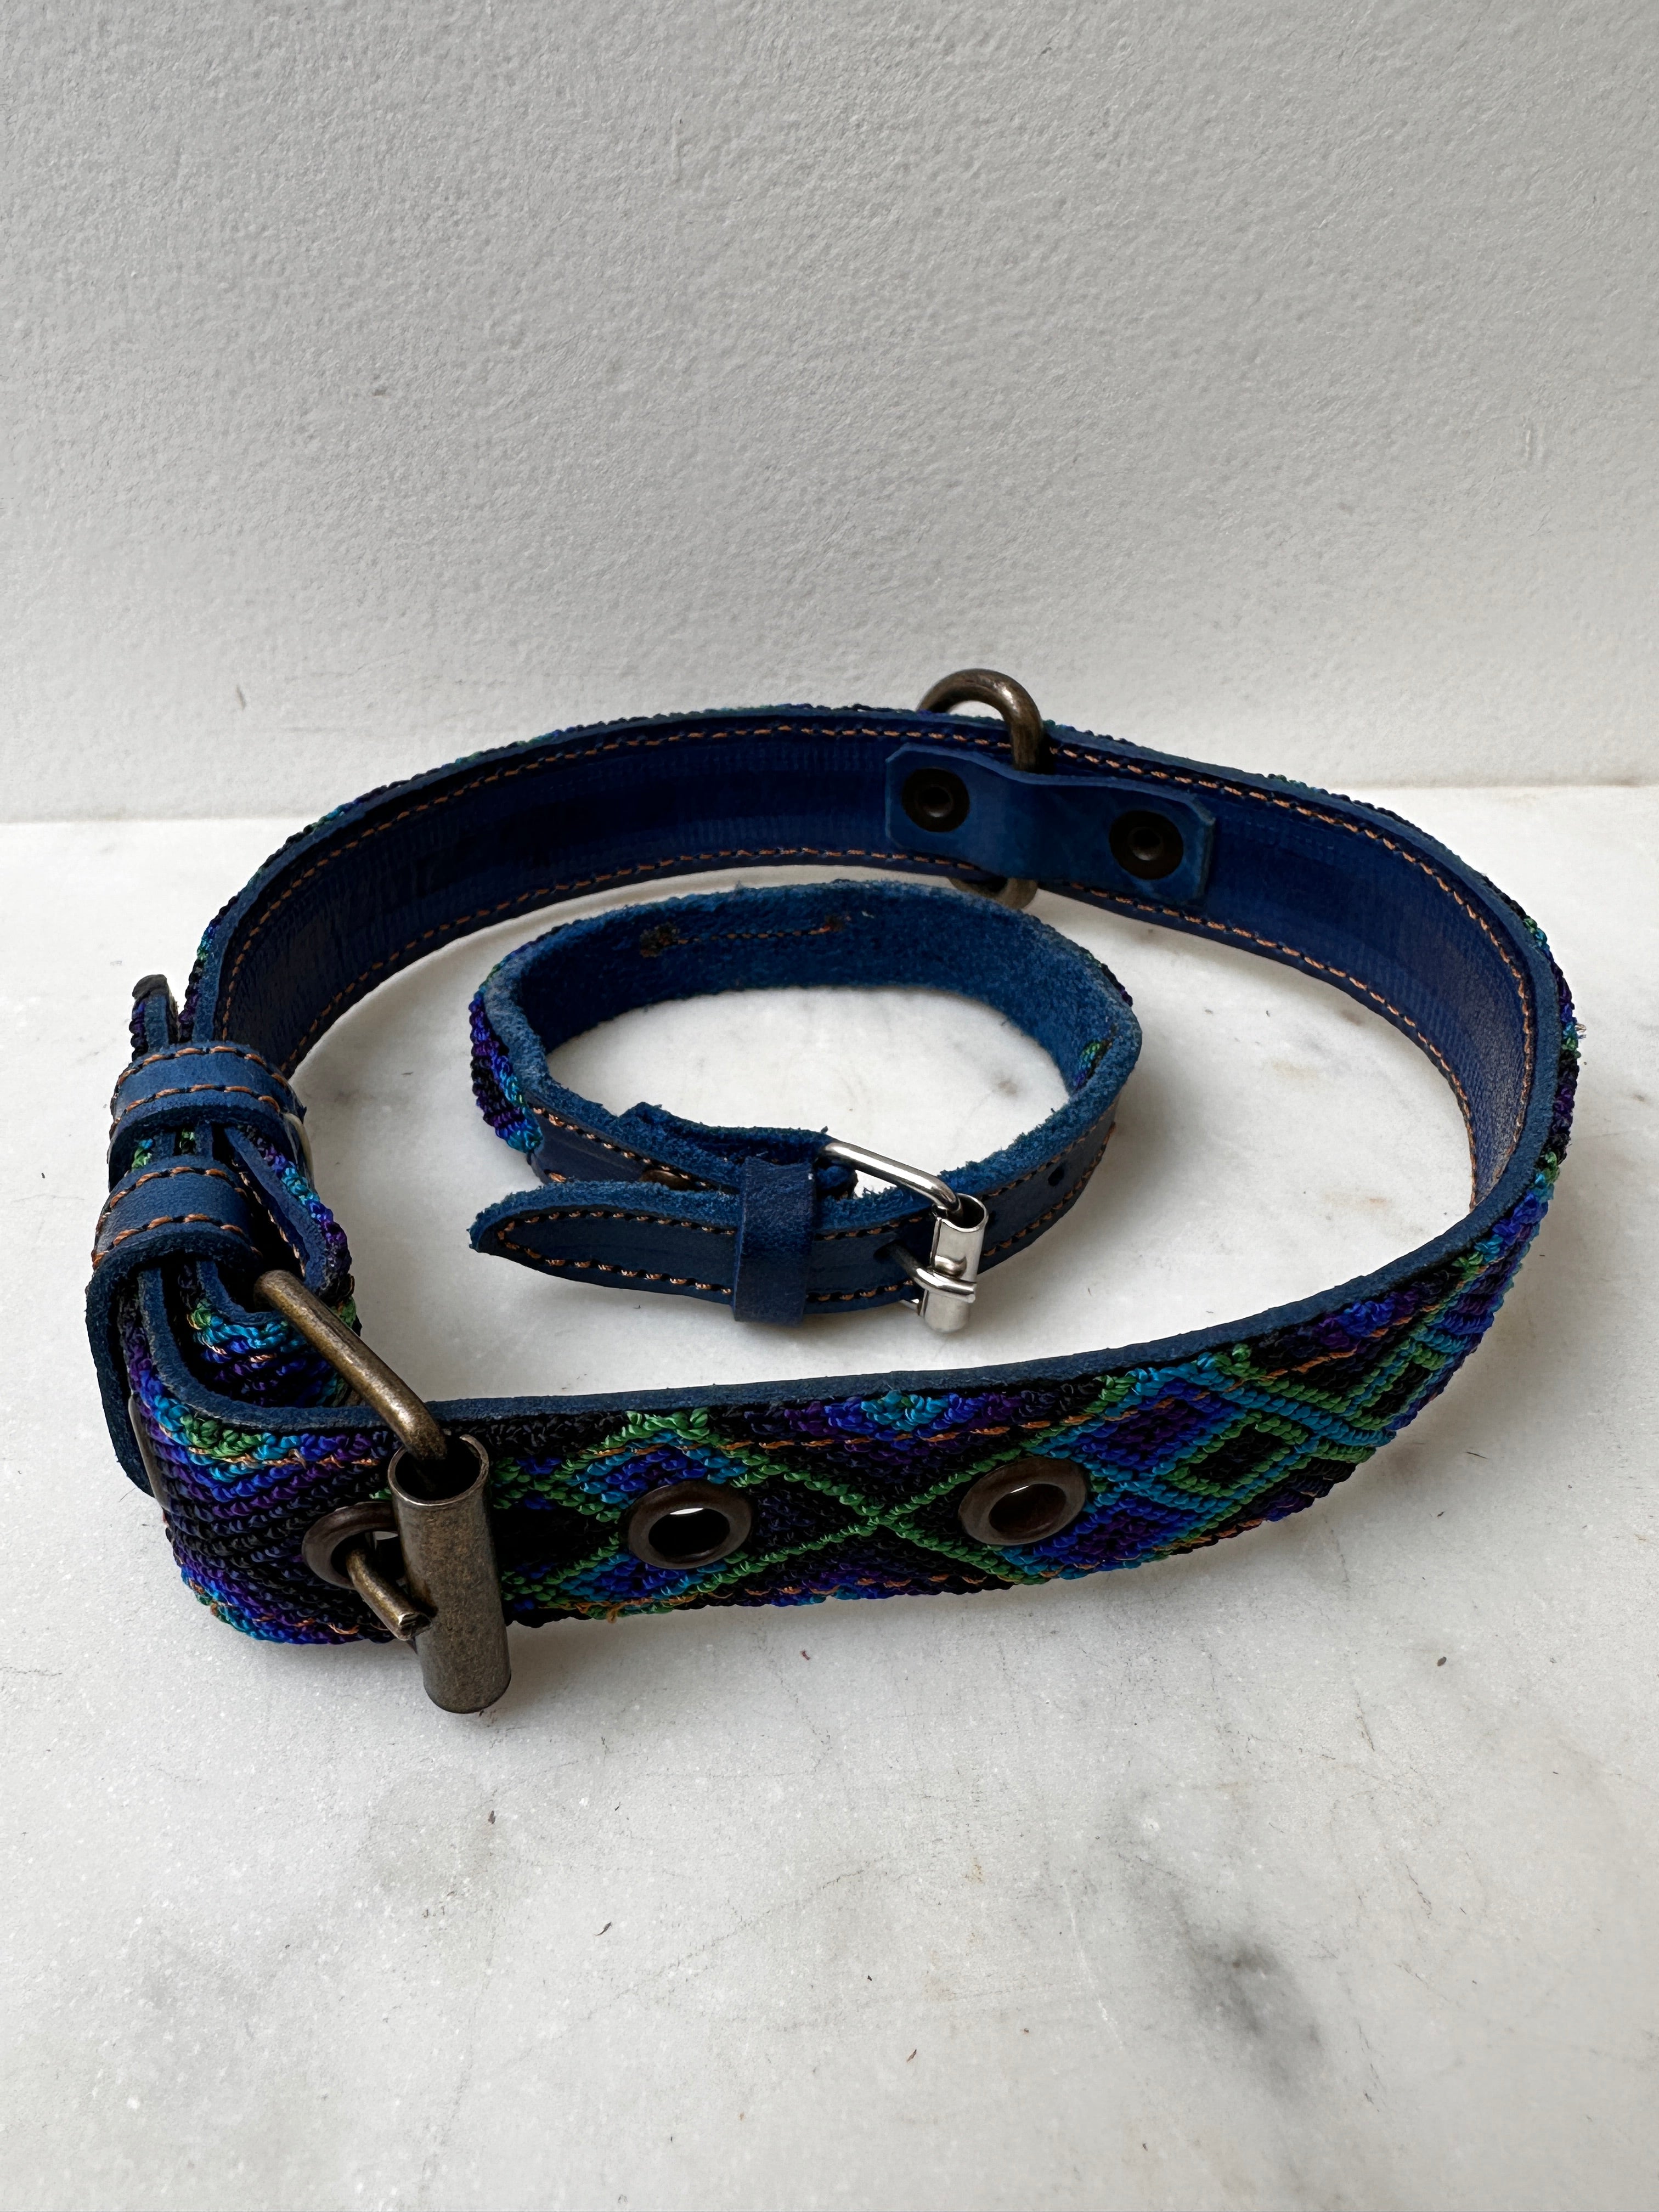 Future Nomads Homewares One Size Huichol Fully Embroidered Dog Collar M7